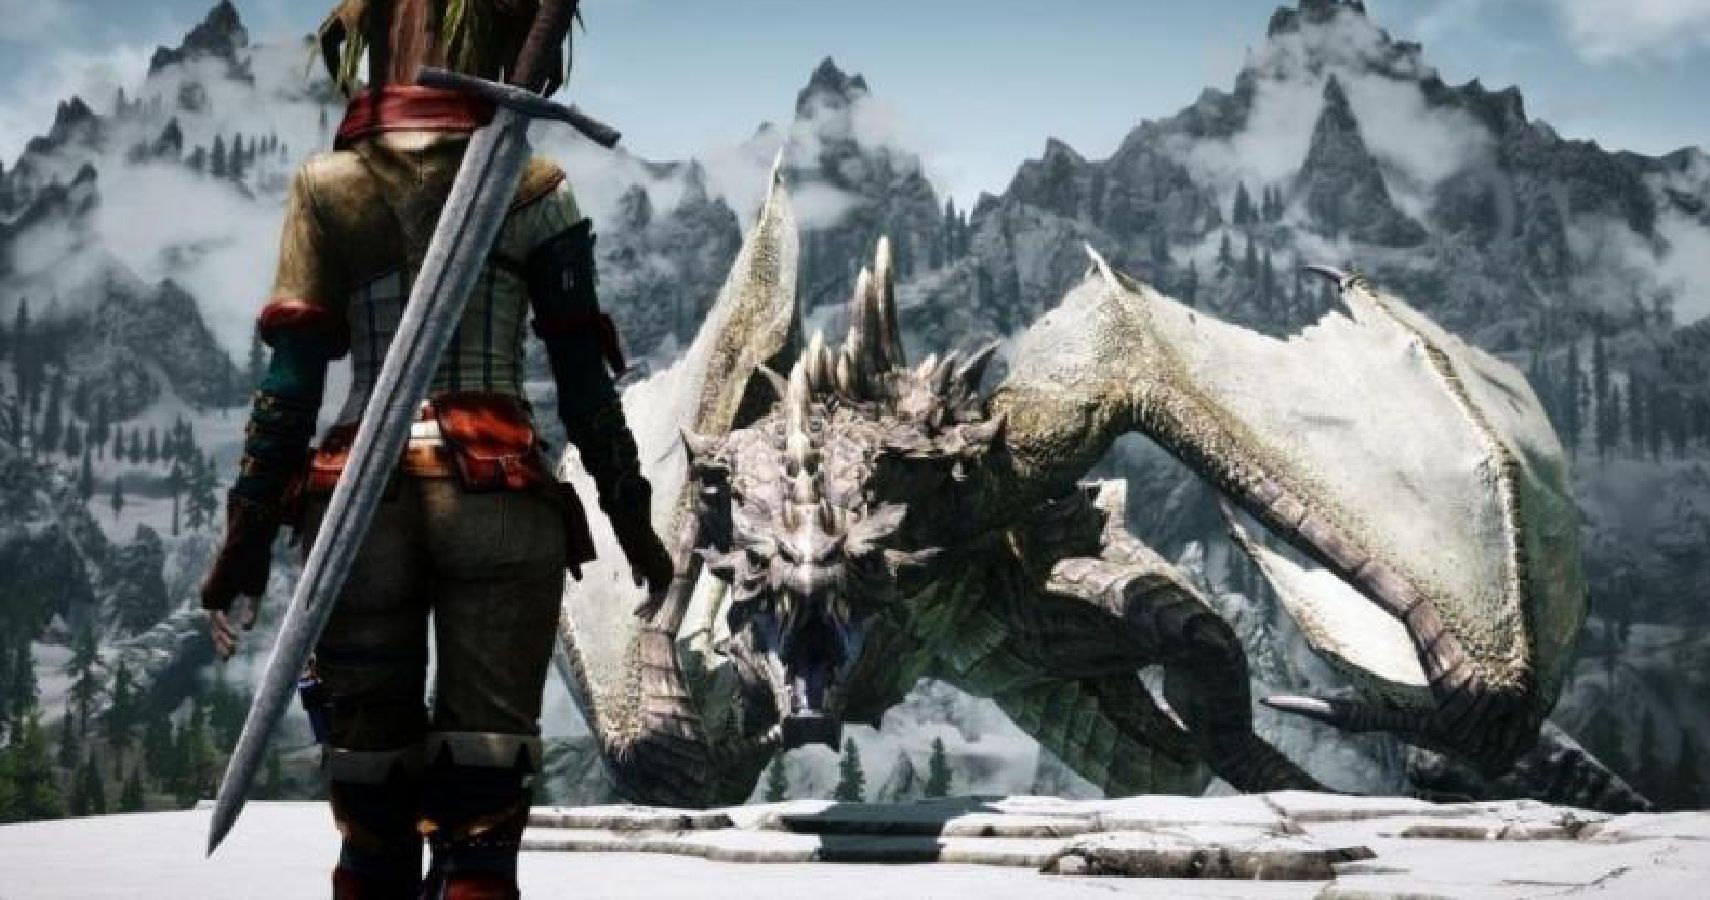 25 Epic Things They Deleted From Skyrim (But Fans Found Anyway)